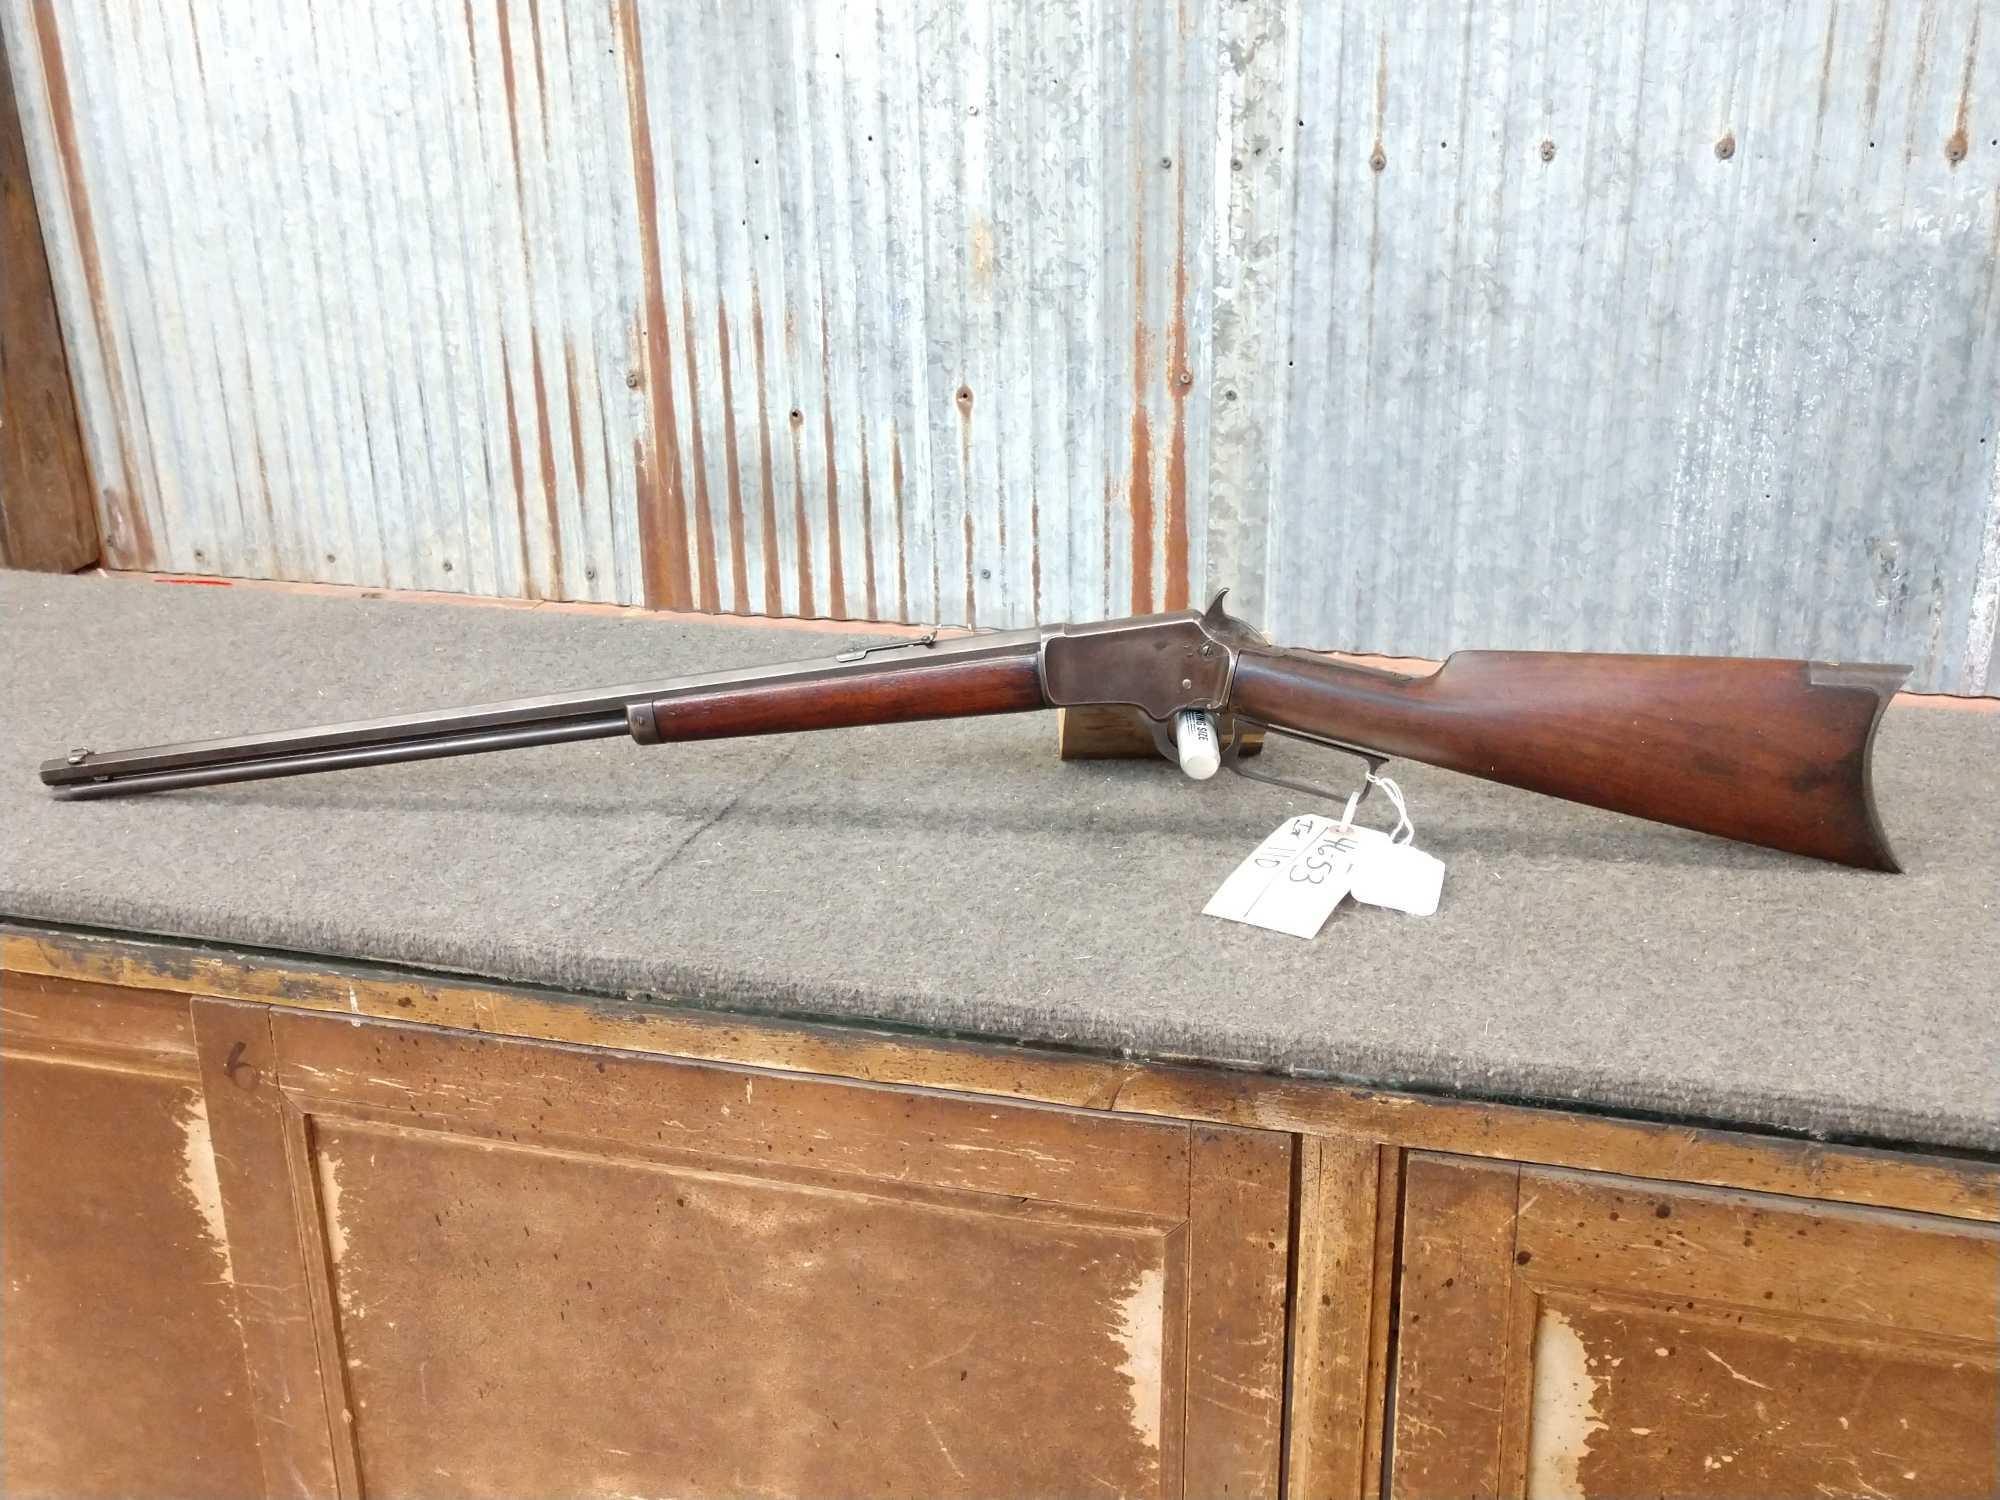 Sold at Auction: Marlin 1897 Century Ltd .22 Ca. Lever Action Rifle